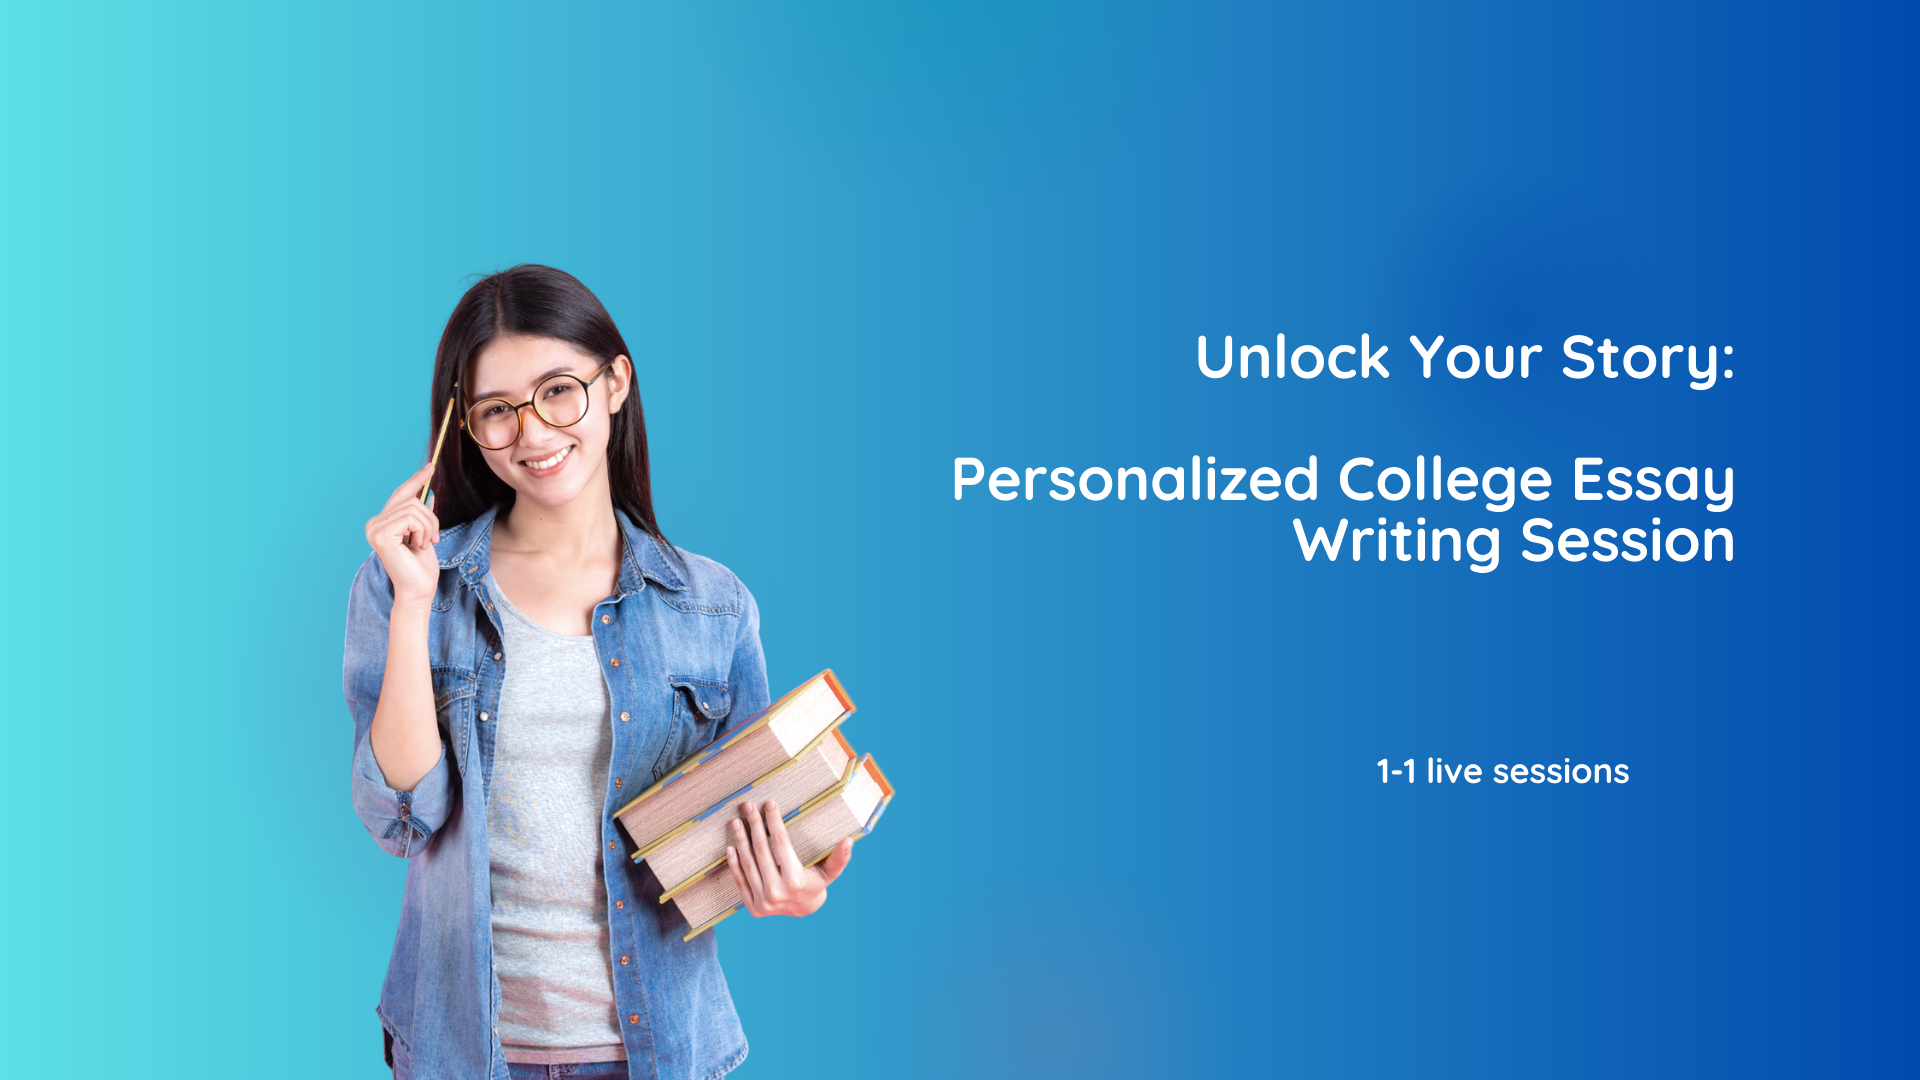 Unlock Your Story: Personalized College Essay Writing Session